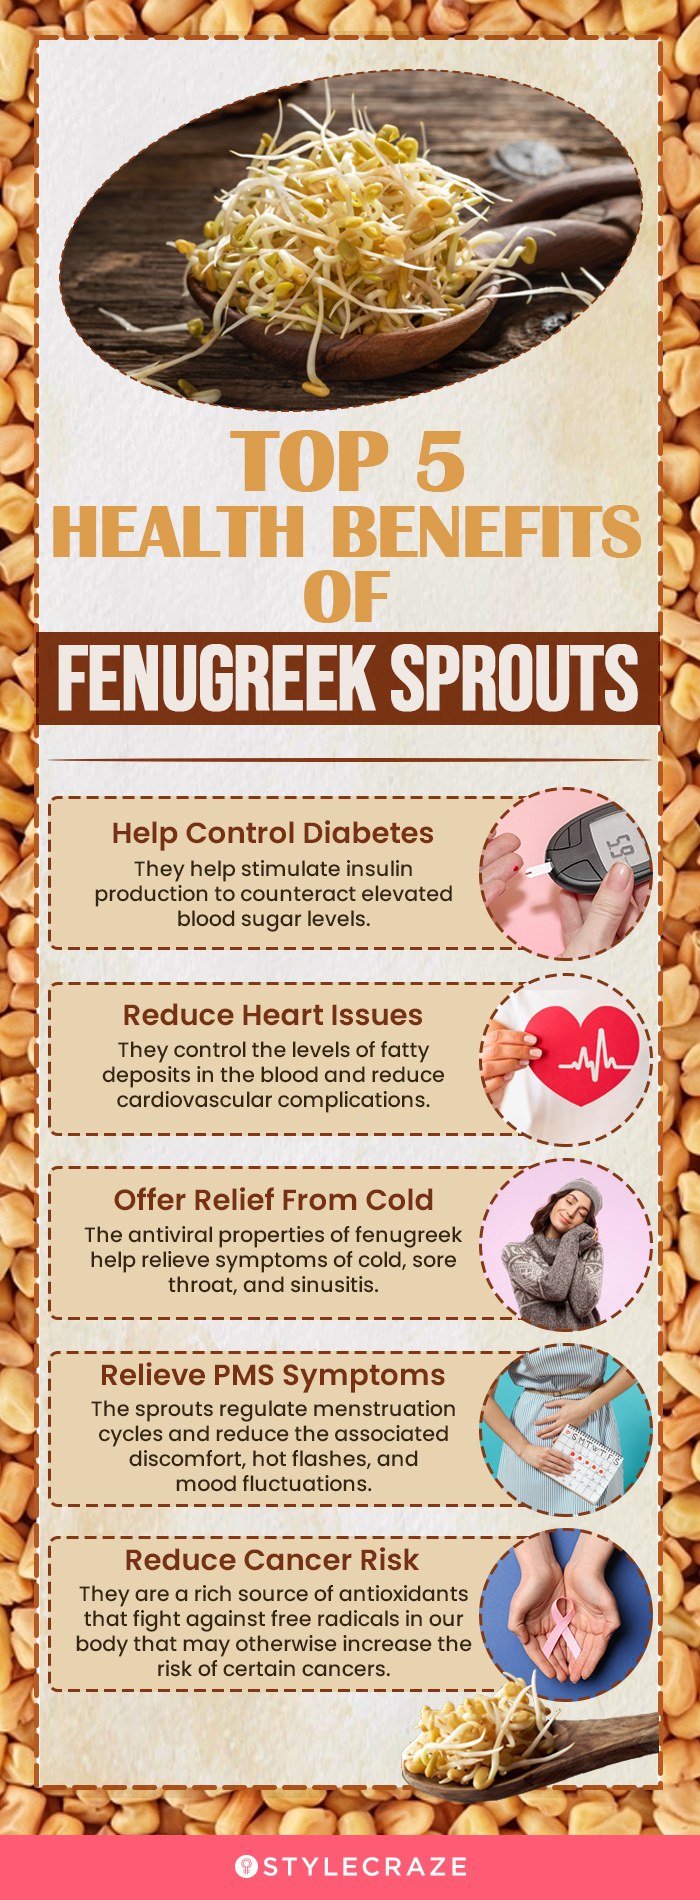 14 Amazing Benefits and Uses Of Fenugreek Sprouts For Skin, Hair and Health